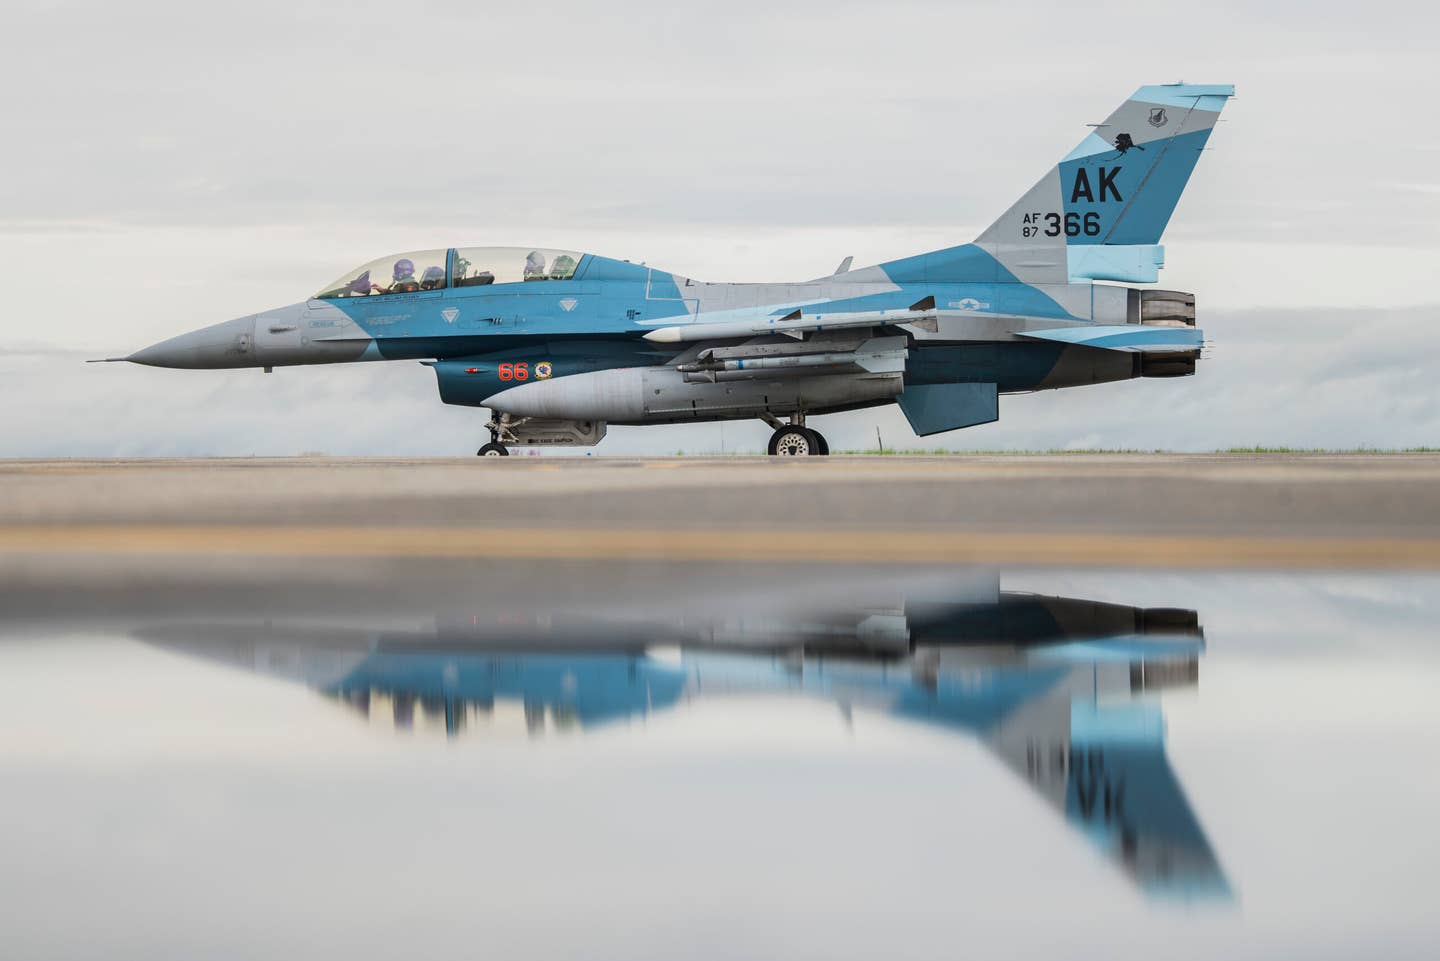 A U.S. Air Force F-16 Fighting Falcon, assigned to the 18th Aggressor Squadron&nbsp;(AGRS) taxis during RED FLAG-Alaska (RF-A) 21-3 at Eielson Air Force Base, Alaska, Aug. 26, 2021. RF-A, a Pacific Air Forces-sponsored exercise held three to four times a year, allows the 18th AGRS to prepare pilots and aircrews from visiting units for conflicts against near-peer adversaries. (U.S. Air Force photo by Senior Airman Aaron Larue Guerrisky)